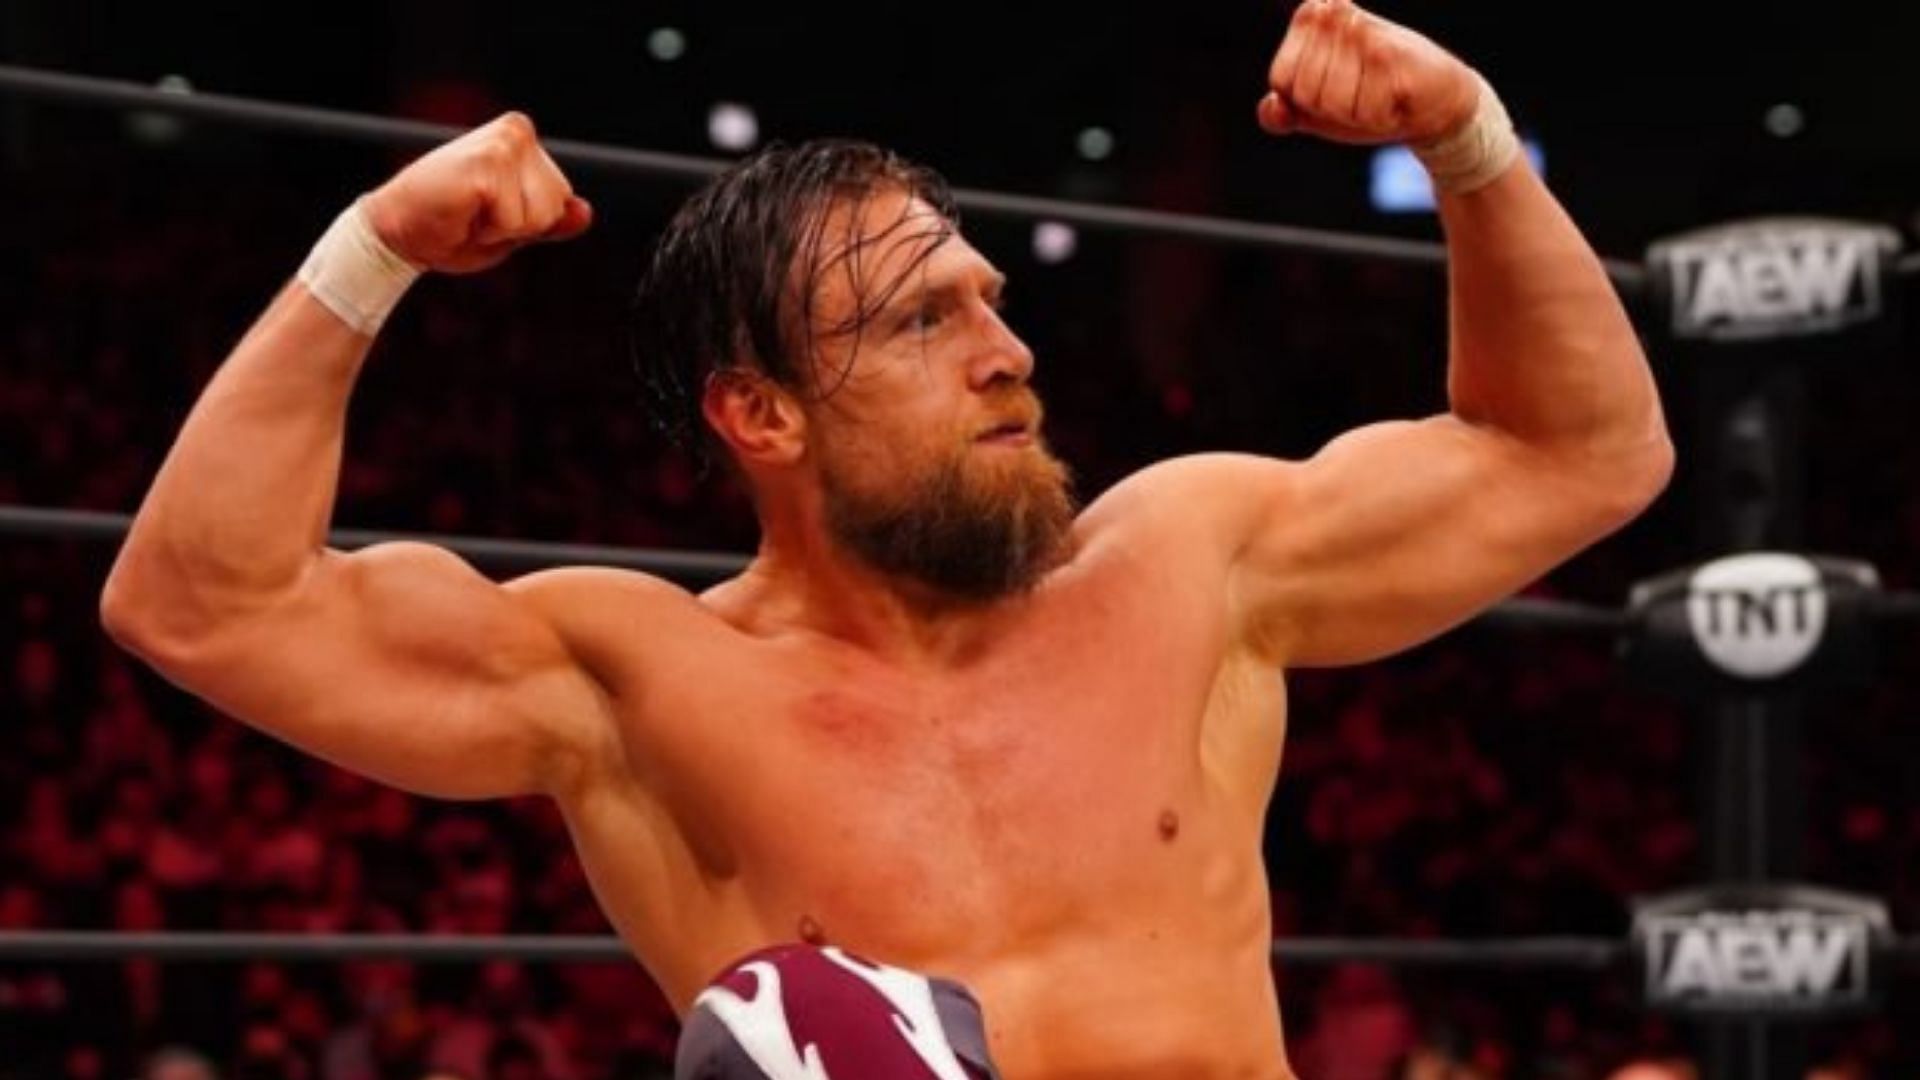 Bryan Danielson at an AEW event in 2022!